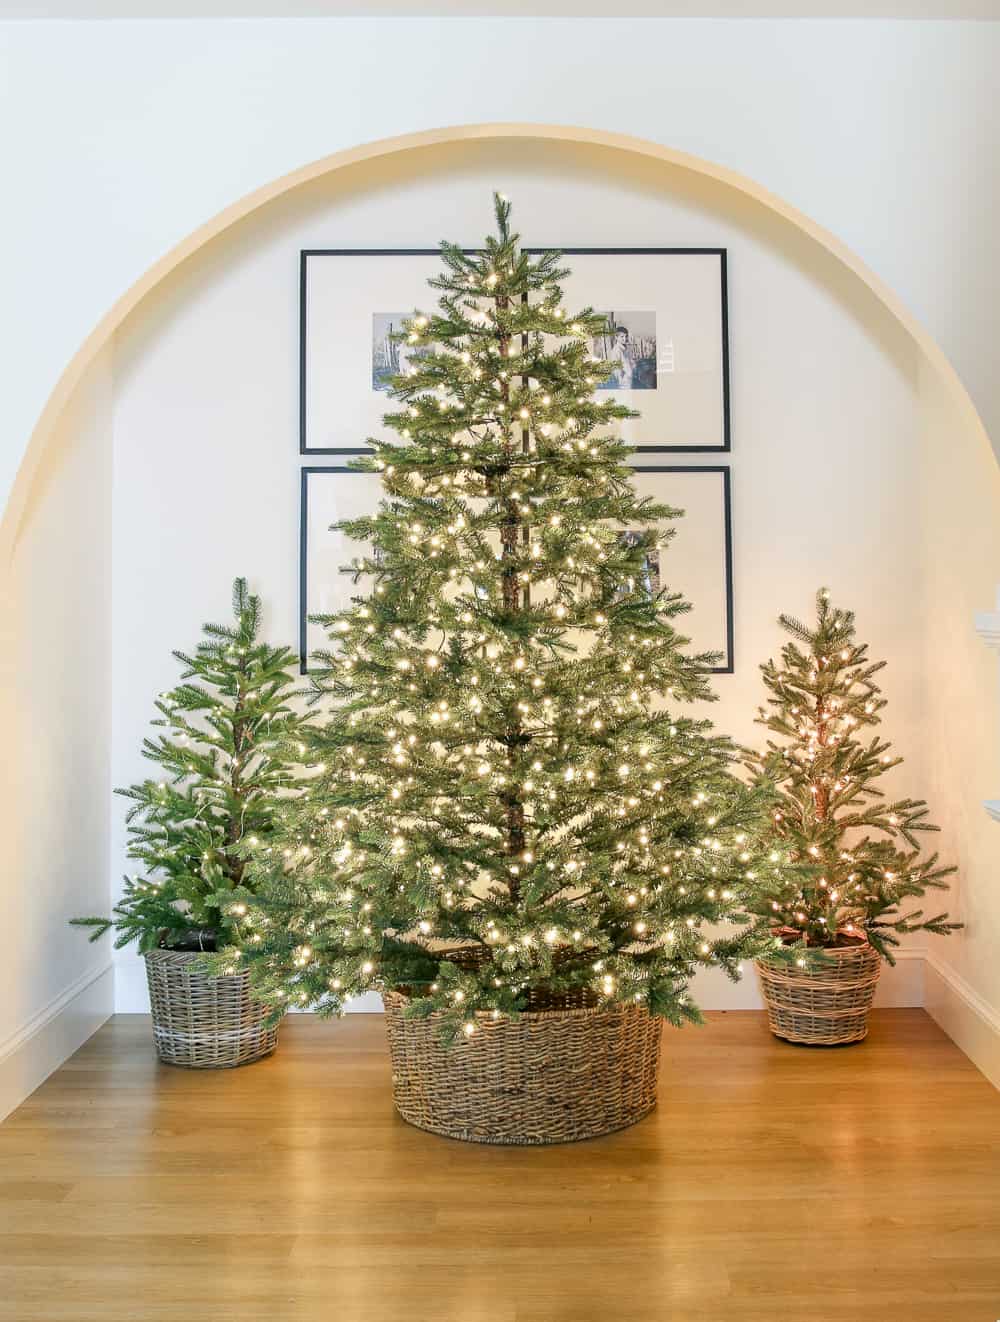 Artificial Christmas tree display in arched niche. Tall one in center and small ones on either side. All are in baskets and pre-lit but have no ornaments